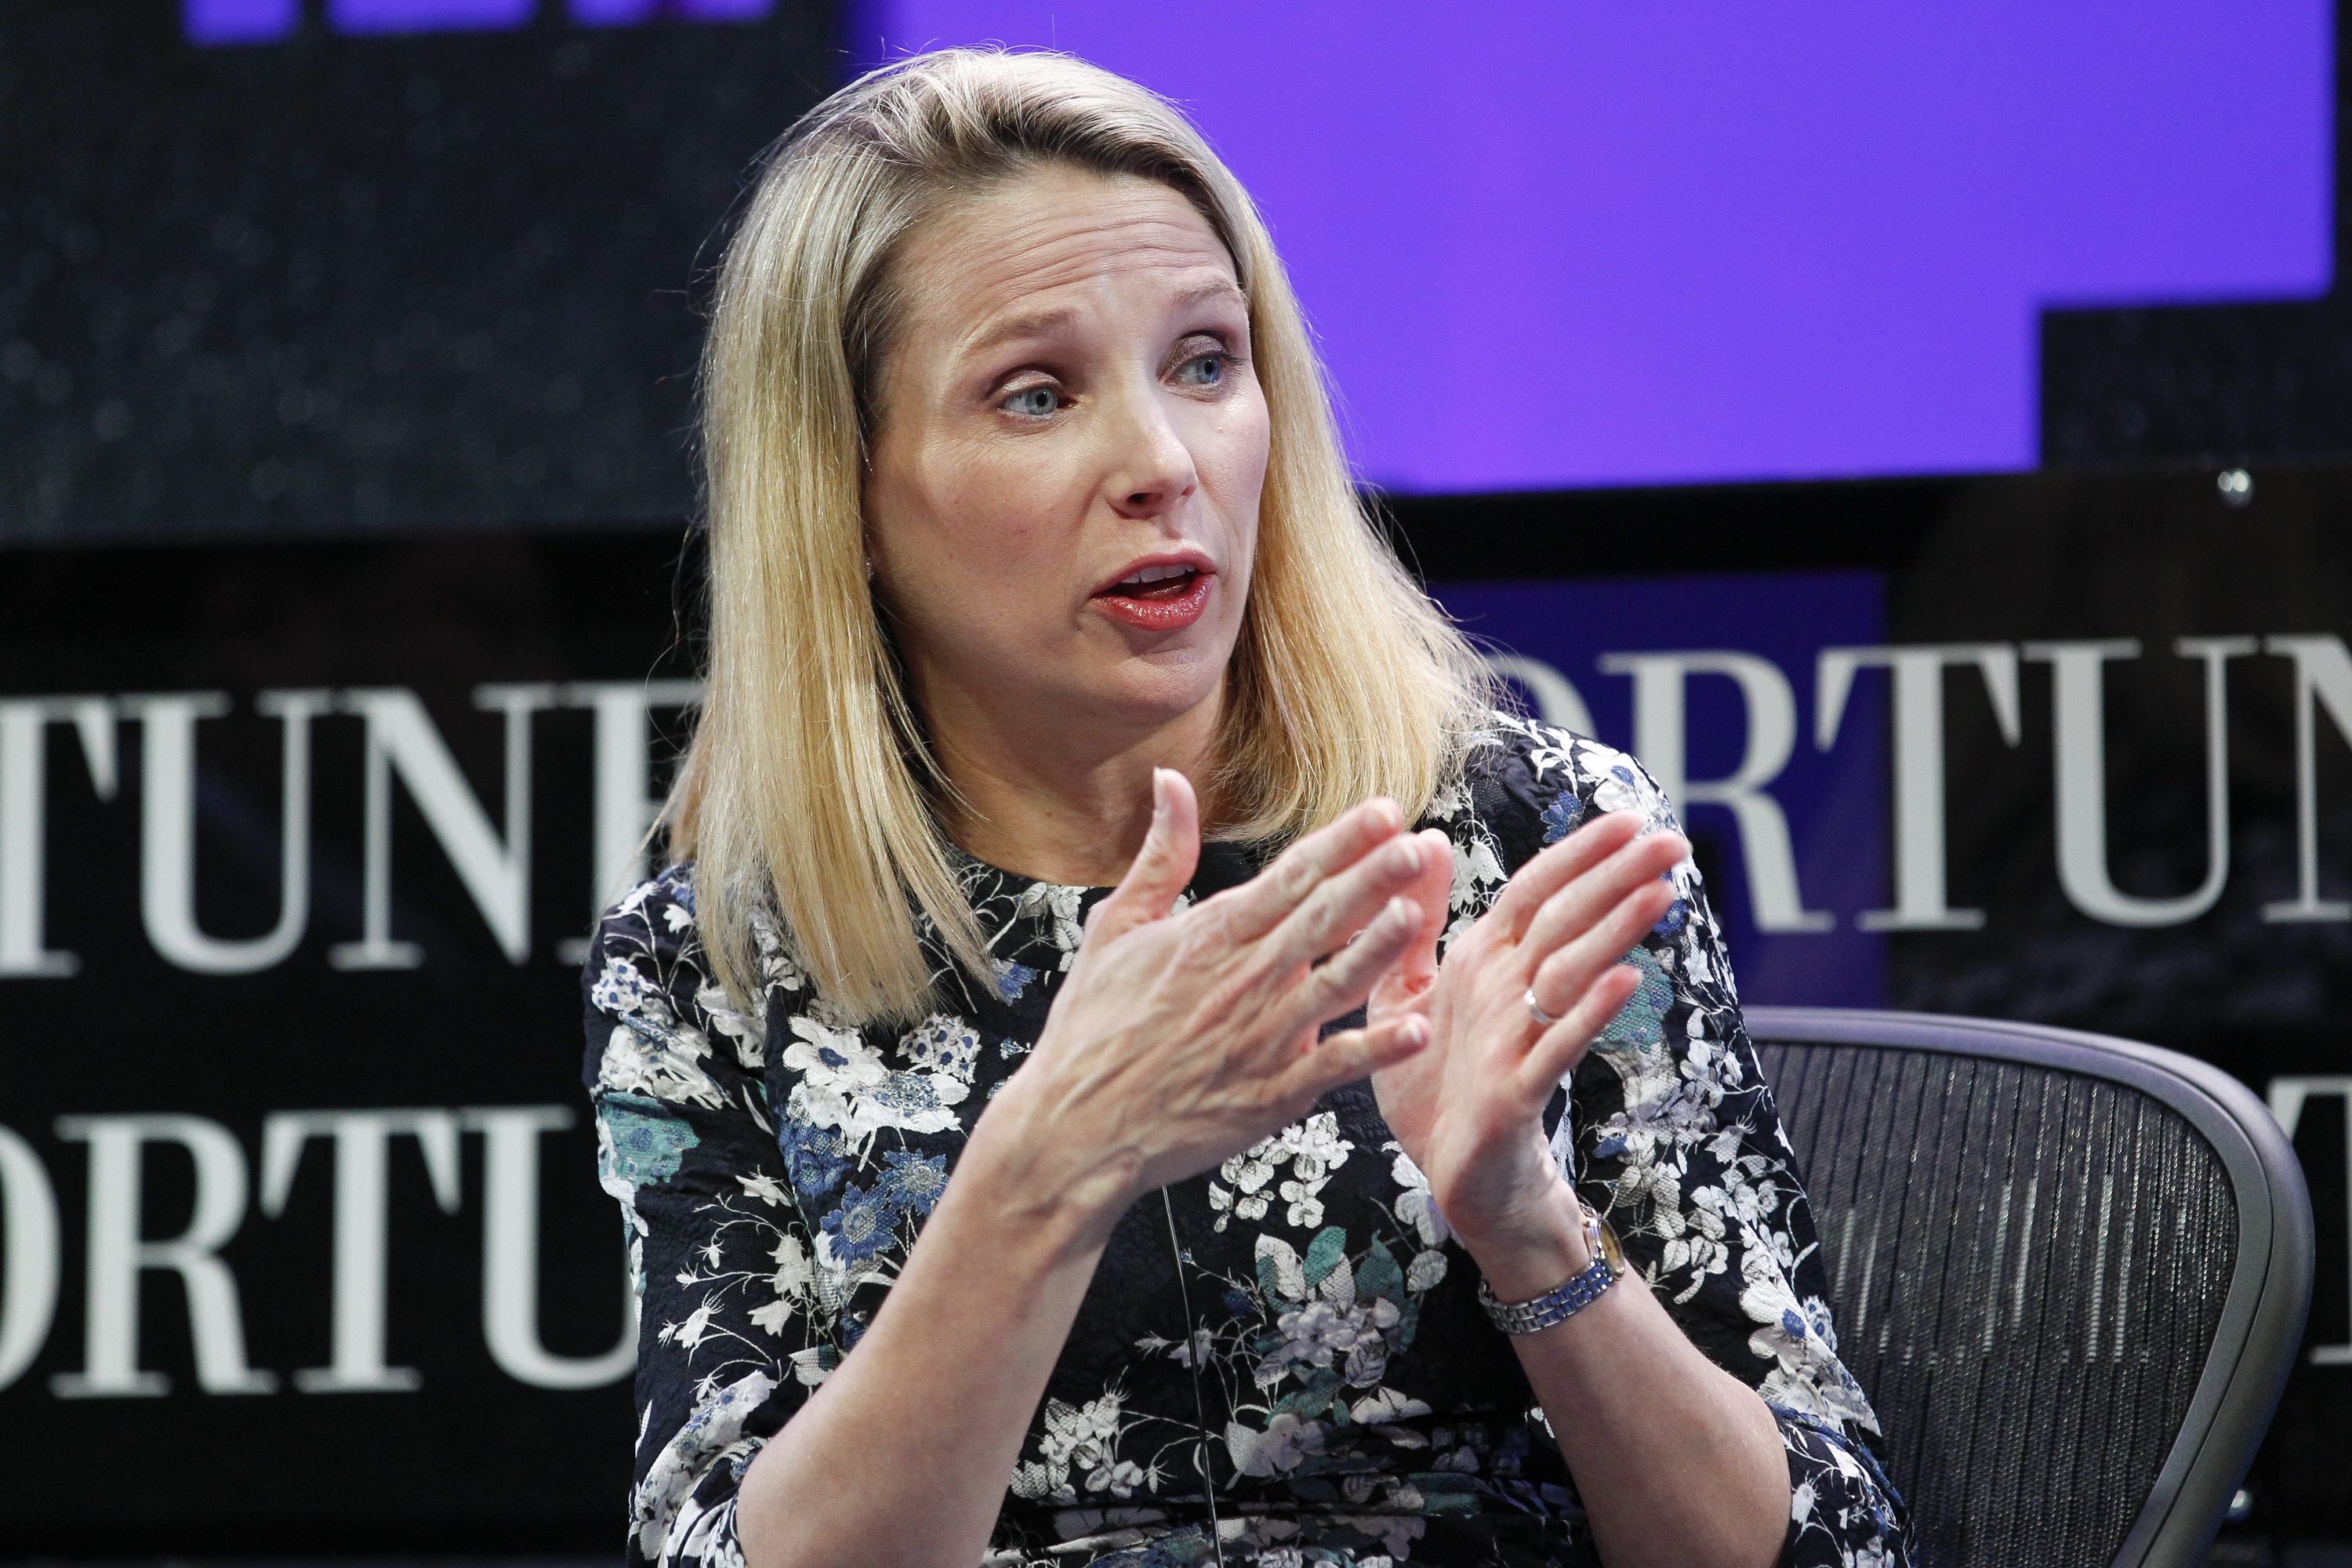 Marissa Mayer speaks during the Fortune Global Forum - Day 2 at the Fairmont Hotel on November 3, 2015 in San Francisco, California. (Kimberly White&mdash;Fortune/Getty Images)